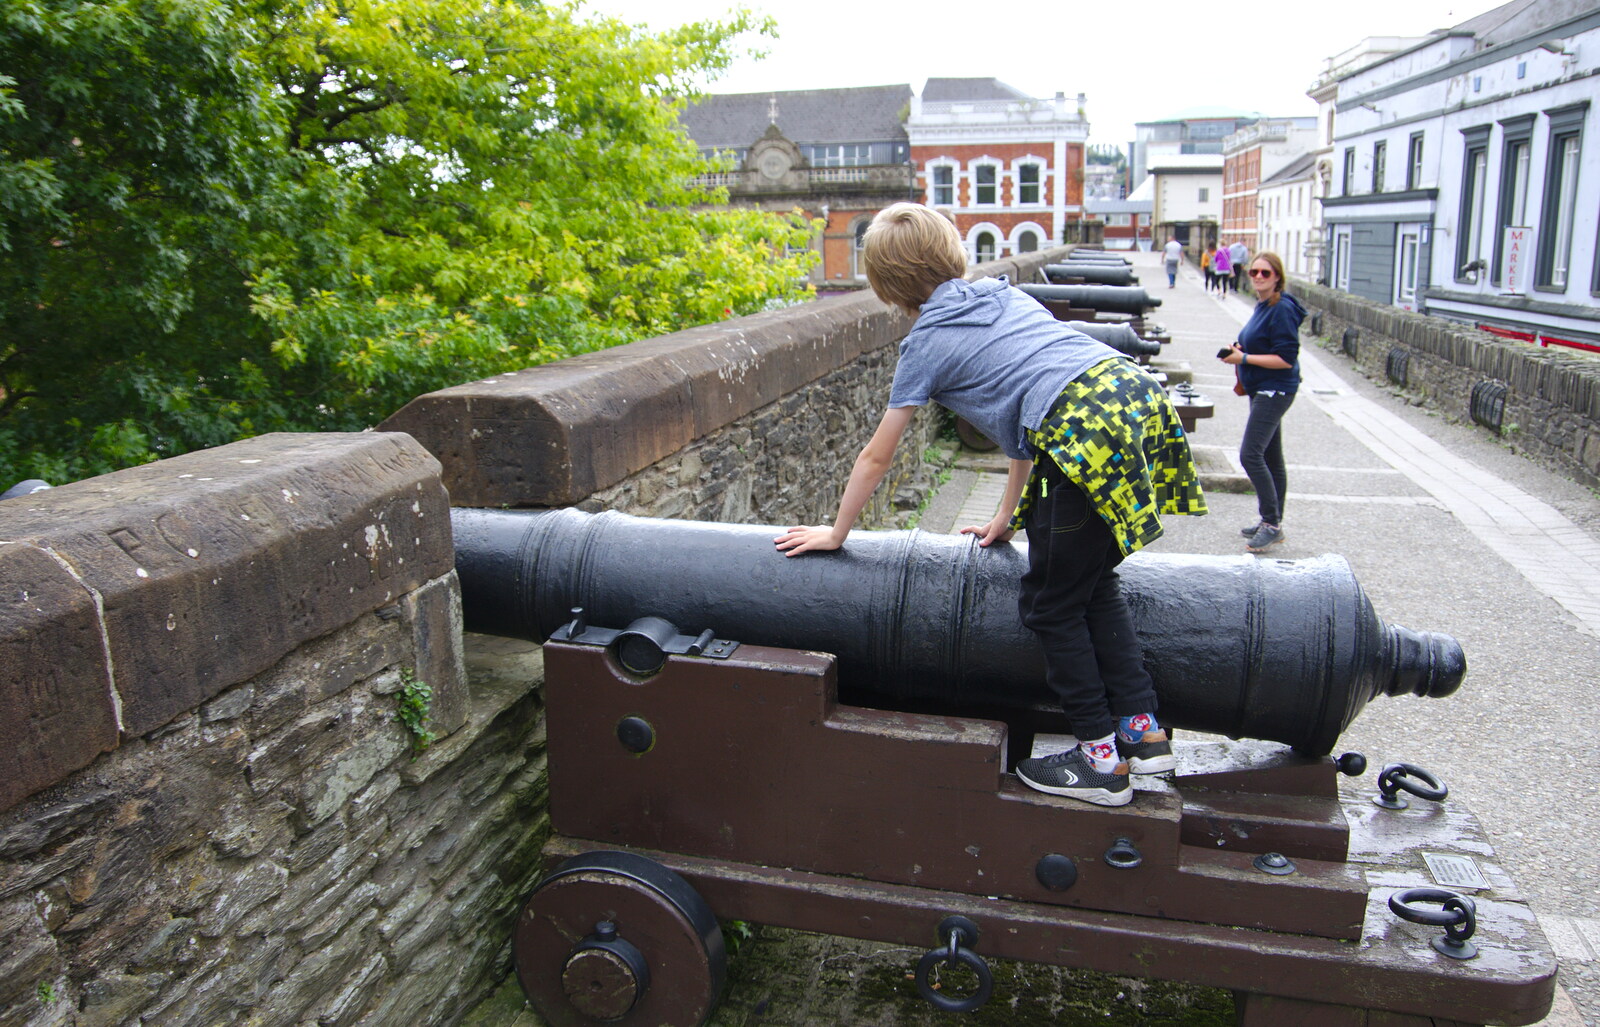 Harry's on a cannon from A Day in Derry, County Londonderry, Northern Ireland - 15th August 2019